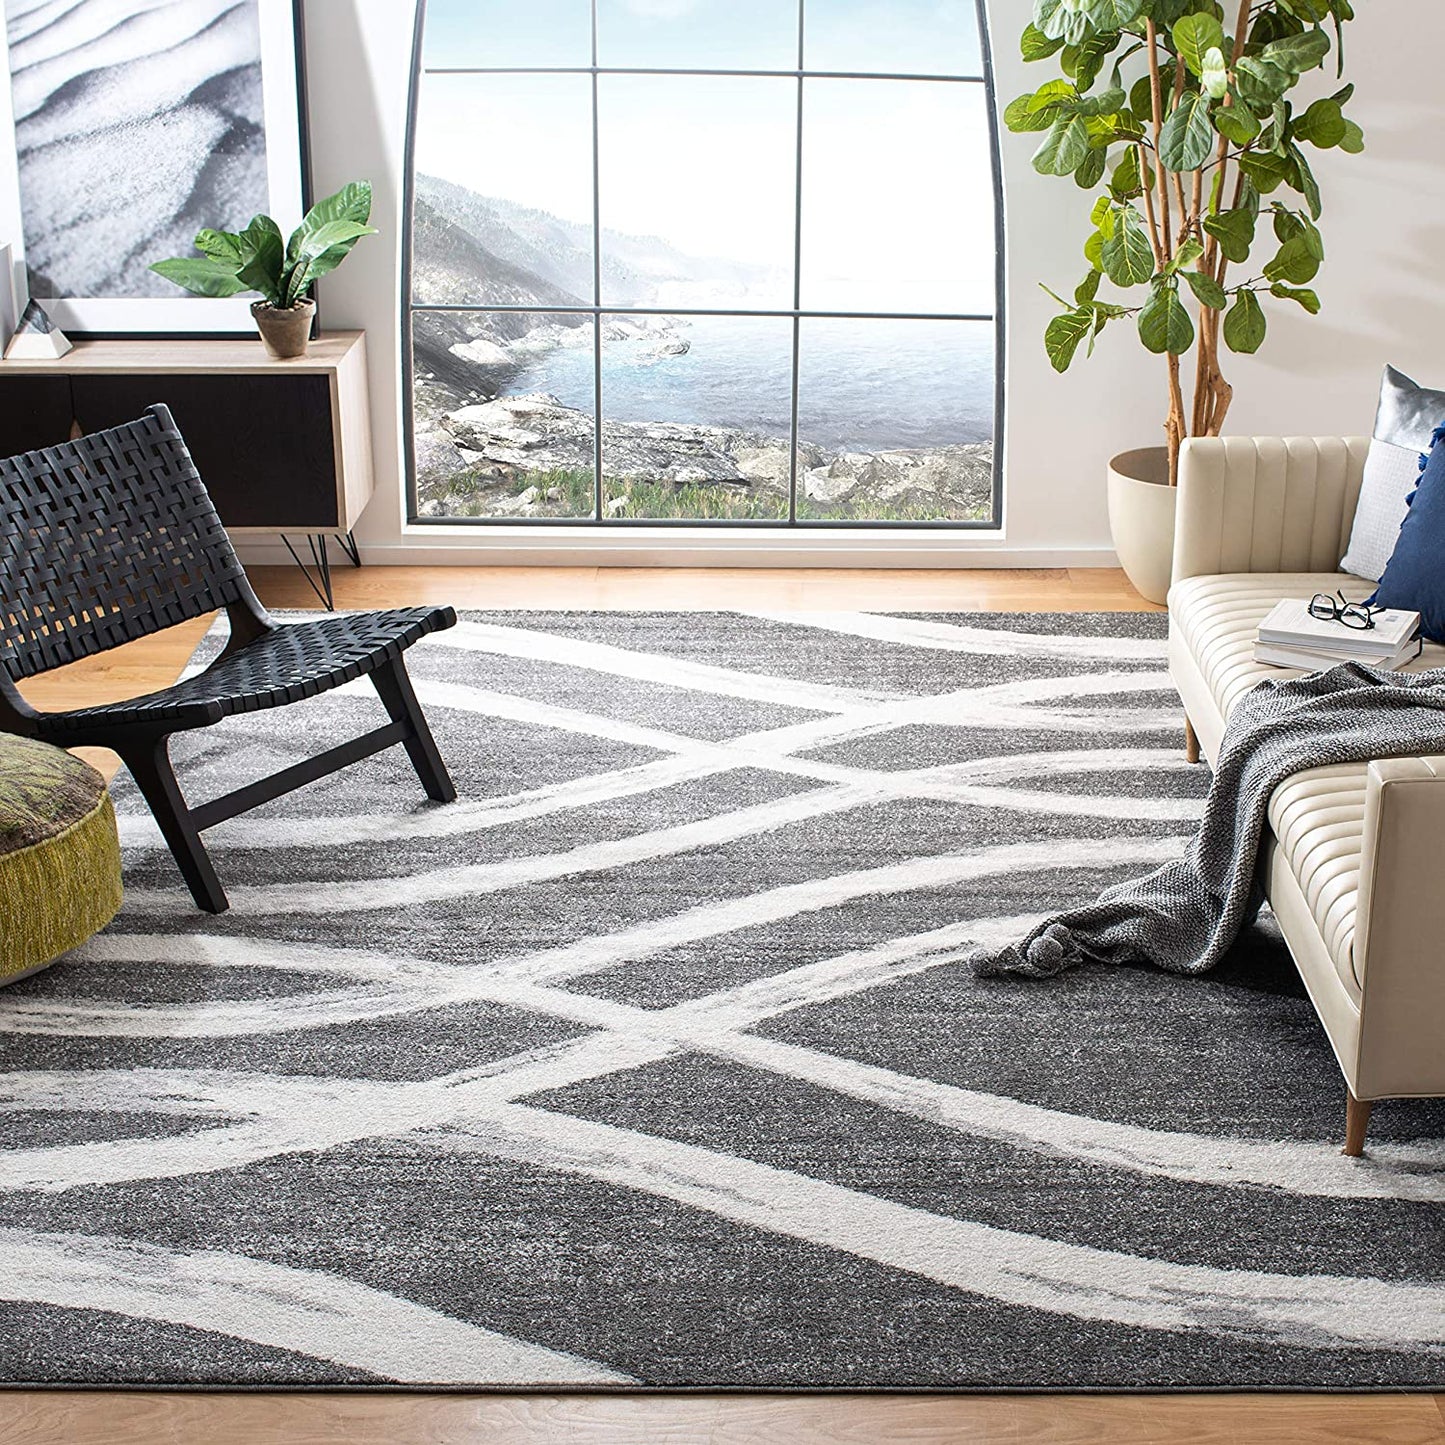 Safavieh Adirondack Collection ADR125R Modern Wave Distressed Non-Shedding Stain Resistant Living Room Bedroom Area Rug, 8' x 10', Charcoal / Ivory